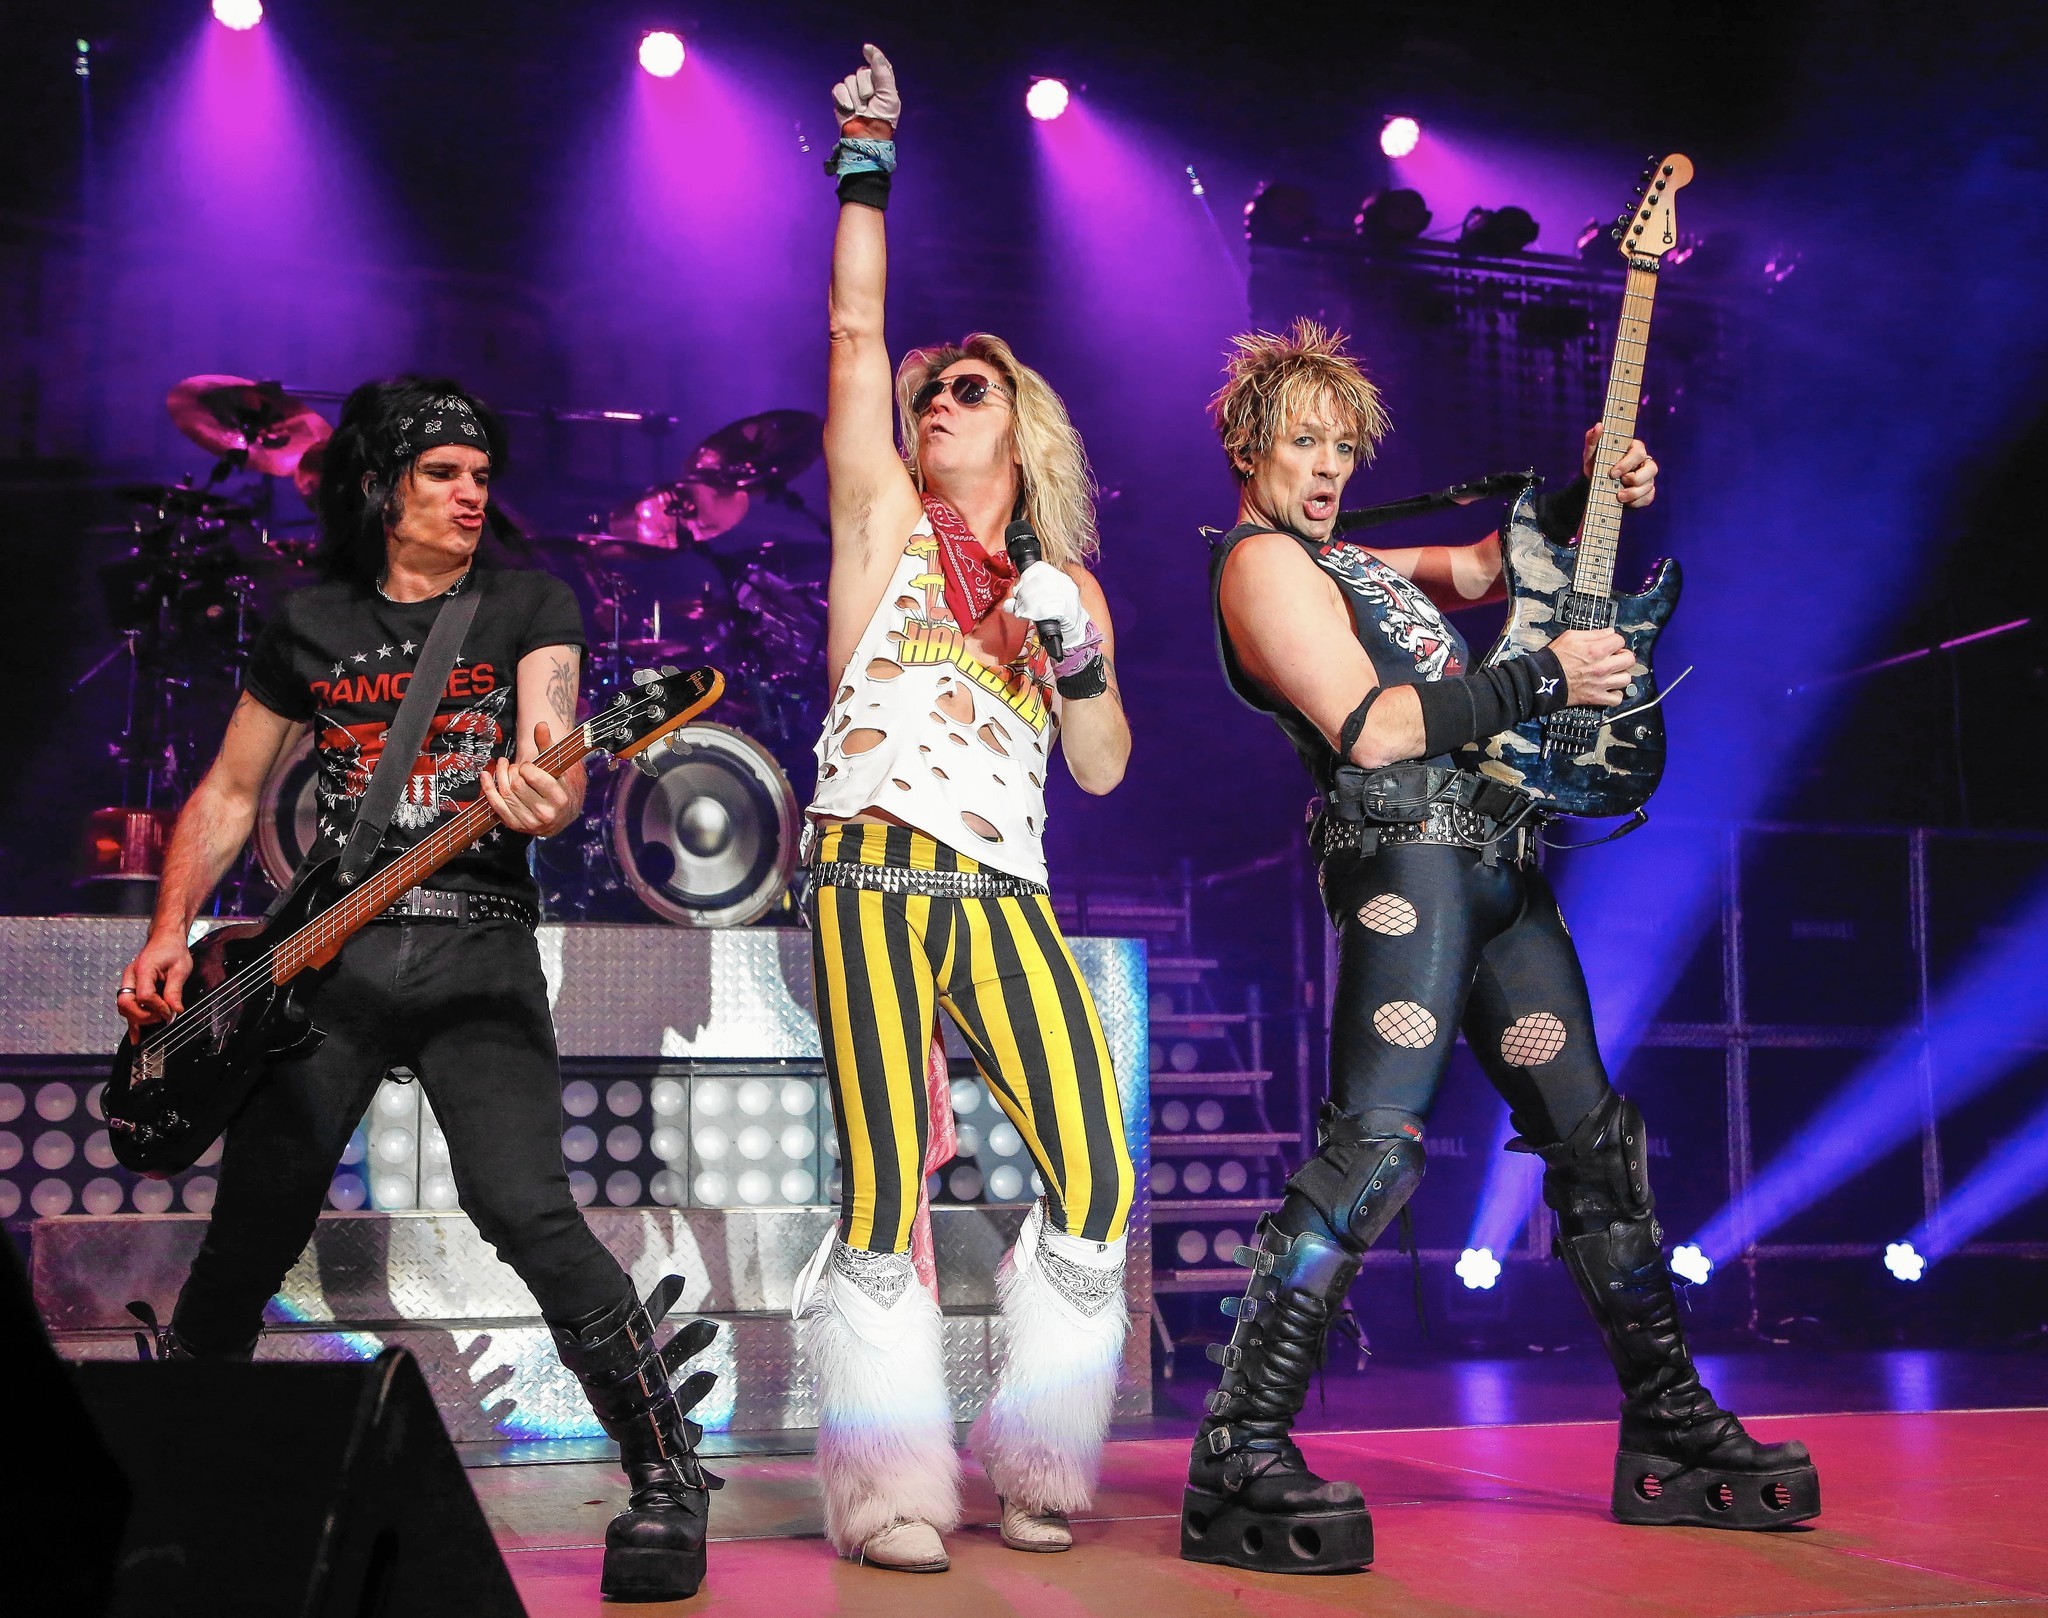 'Hairball' to pay homage to famed arena rock bands of 1980s - Daily Southtown2048 x 1618